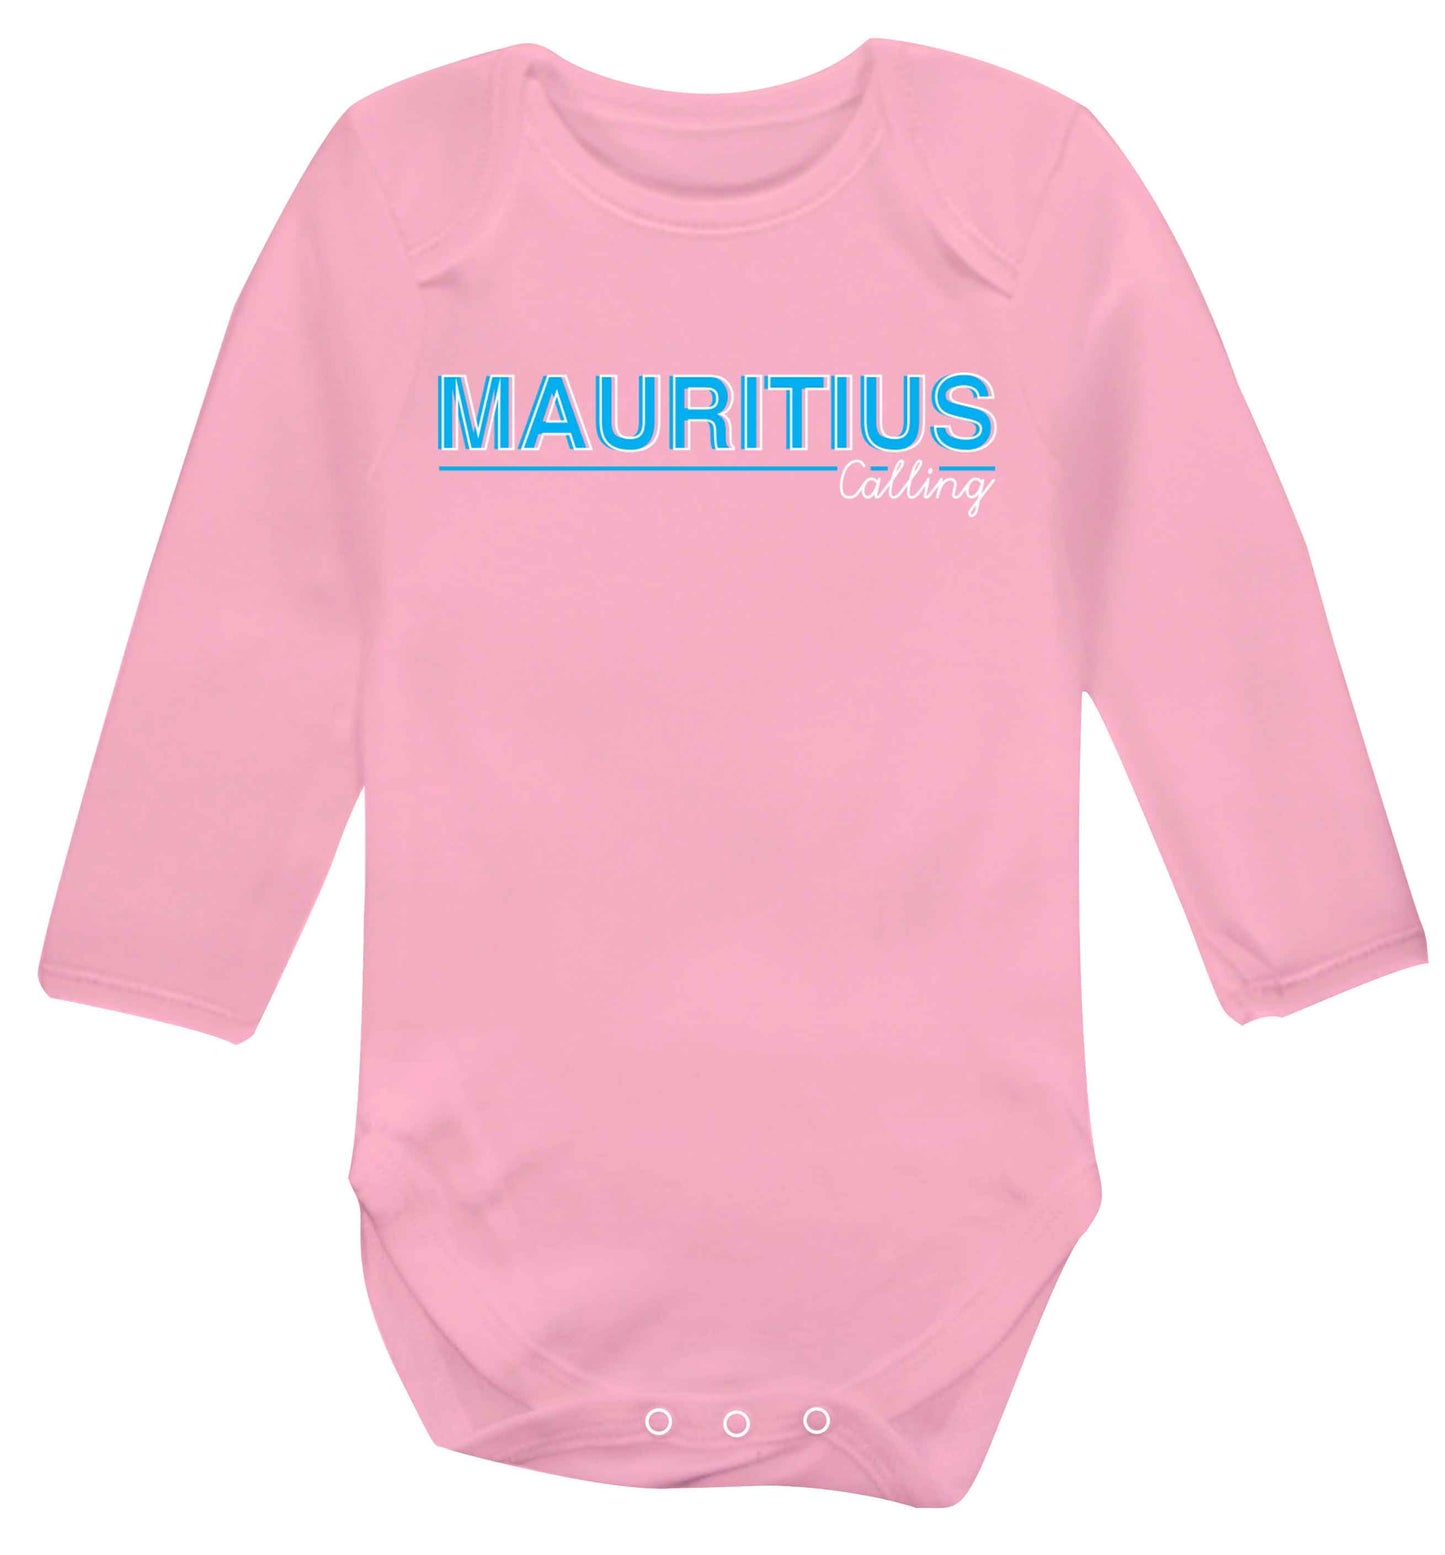 Mauritius calling Baby Vest long sleeved pale pink 6-12 months